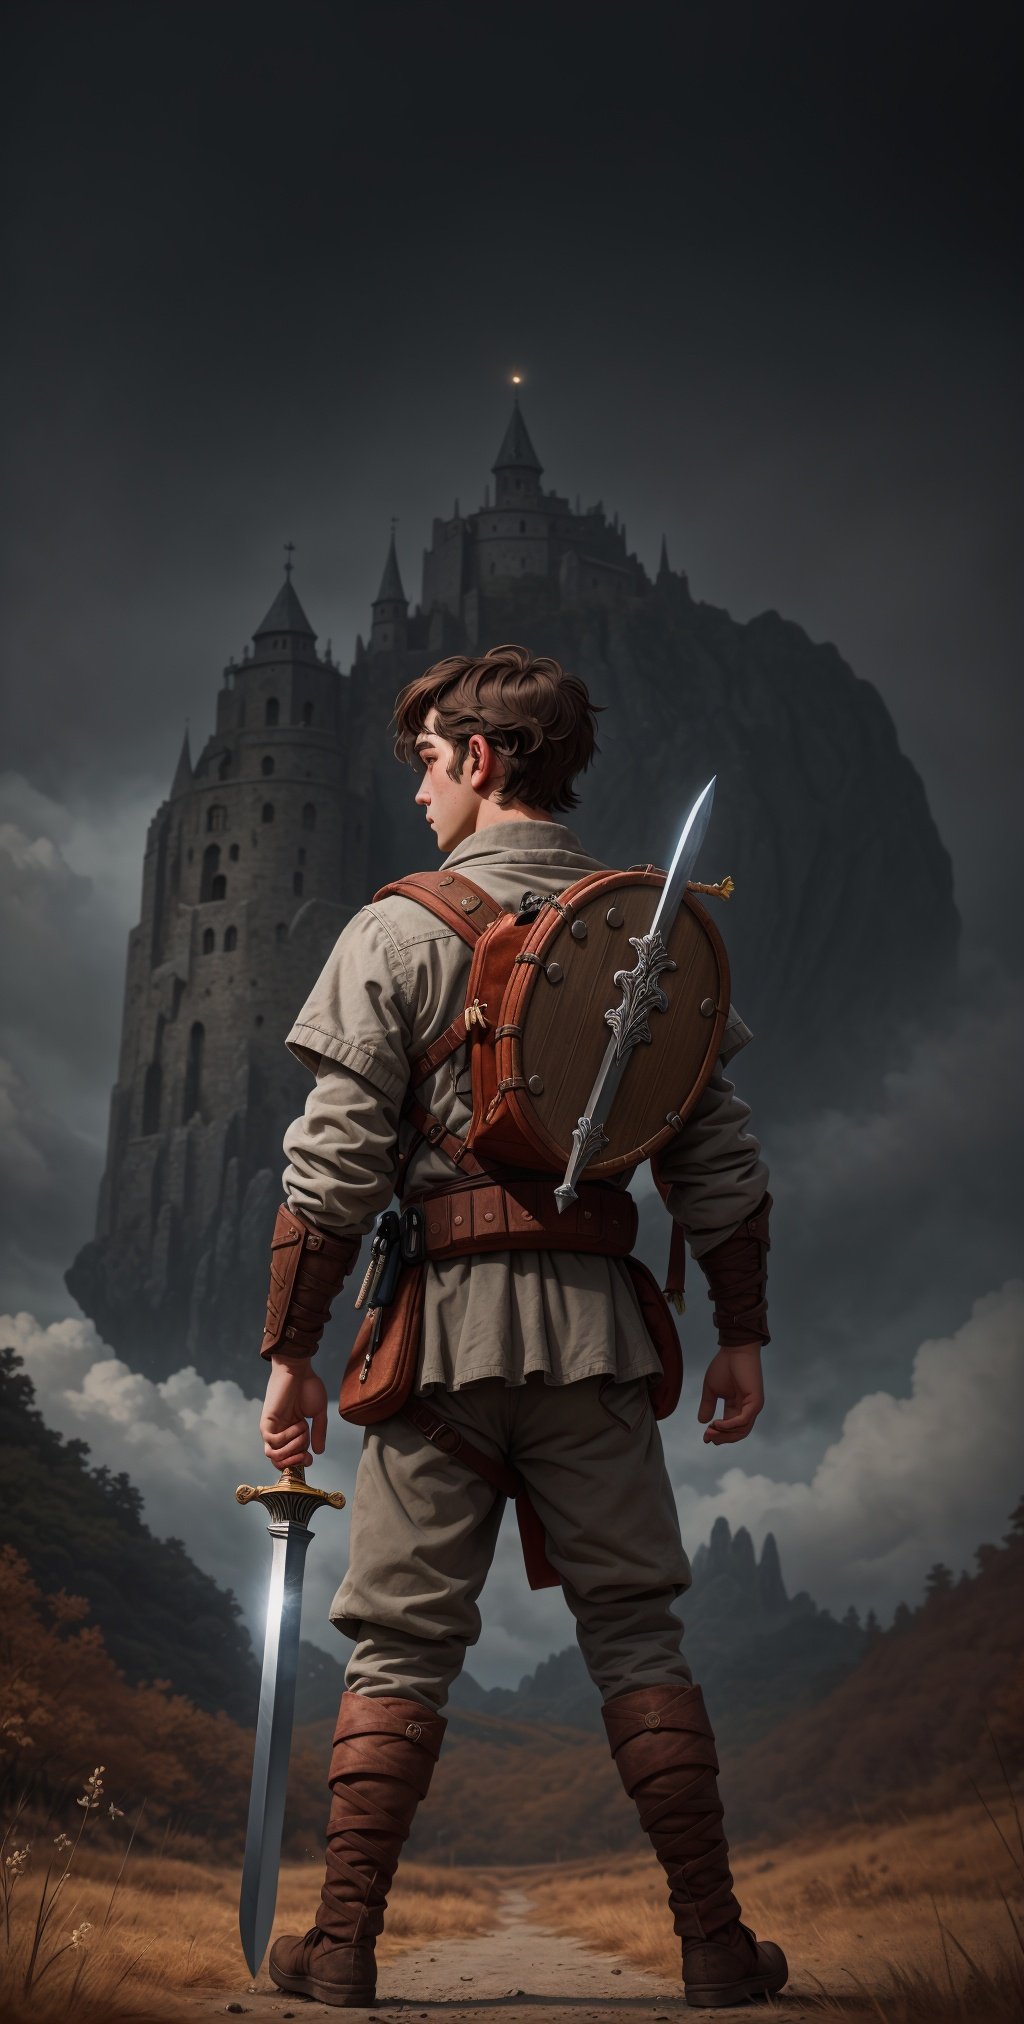 masterpiece, best quality, Grey-eyed European boy with brown hair, he has a sword in his back in his quiver, RAW photo, full sharp, (FullHD epic wallpaper) 8k uhd, dslr, soft lighting, high quality, film grain, Fujifilm XT3